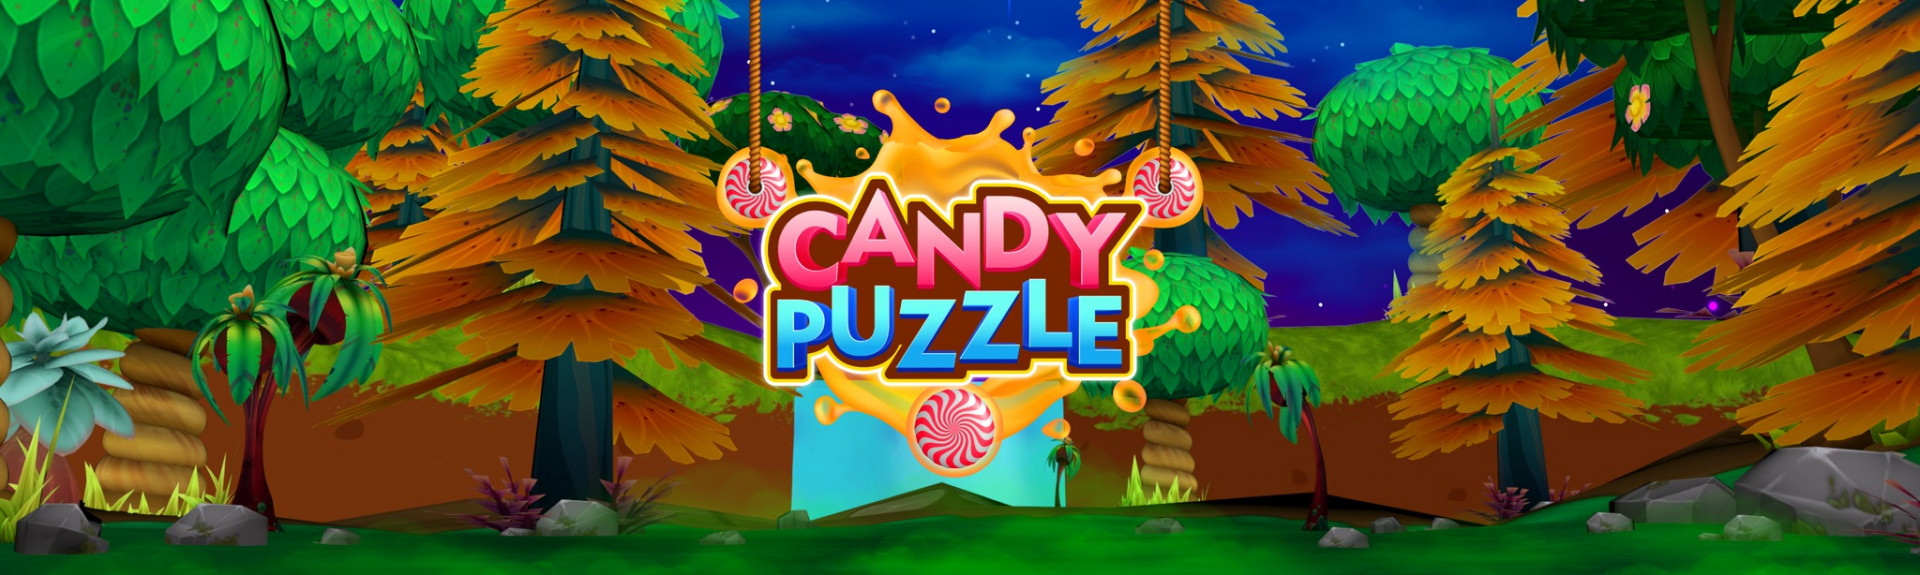 Candy Puzzle Demo